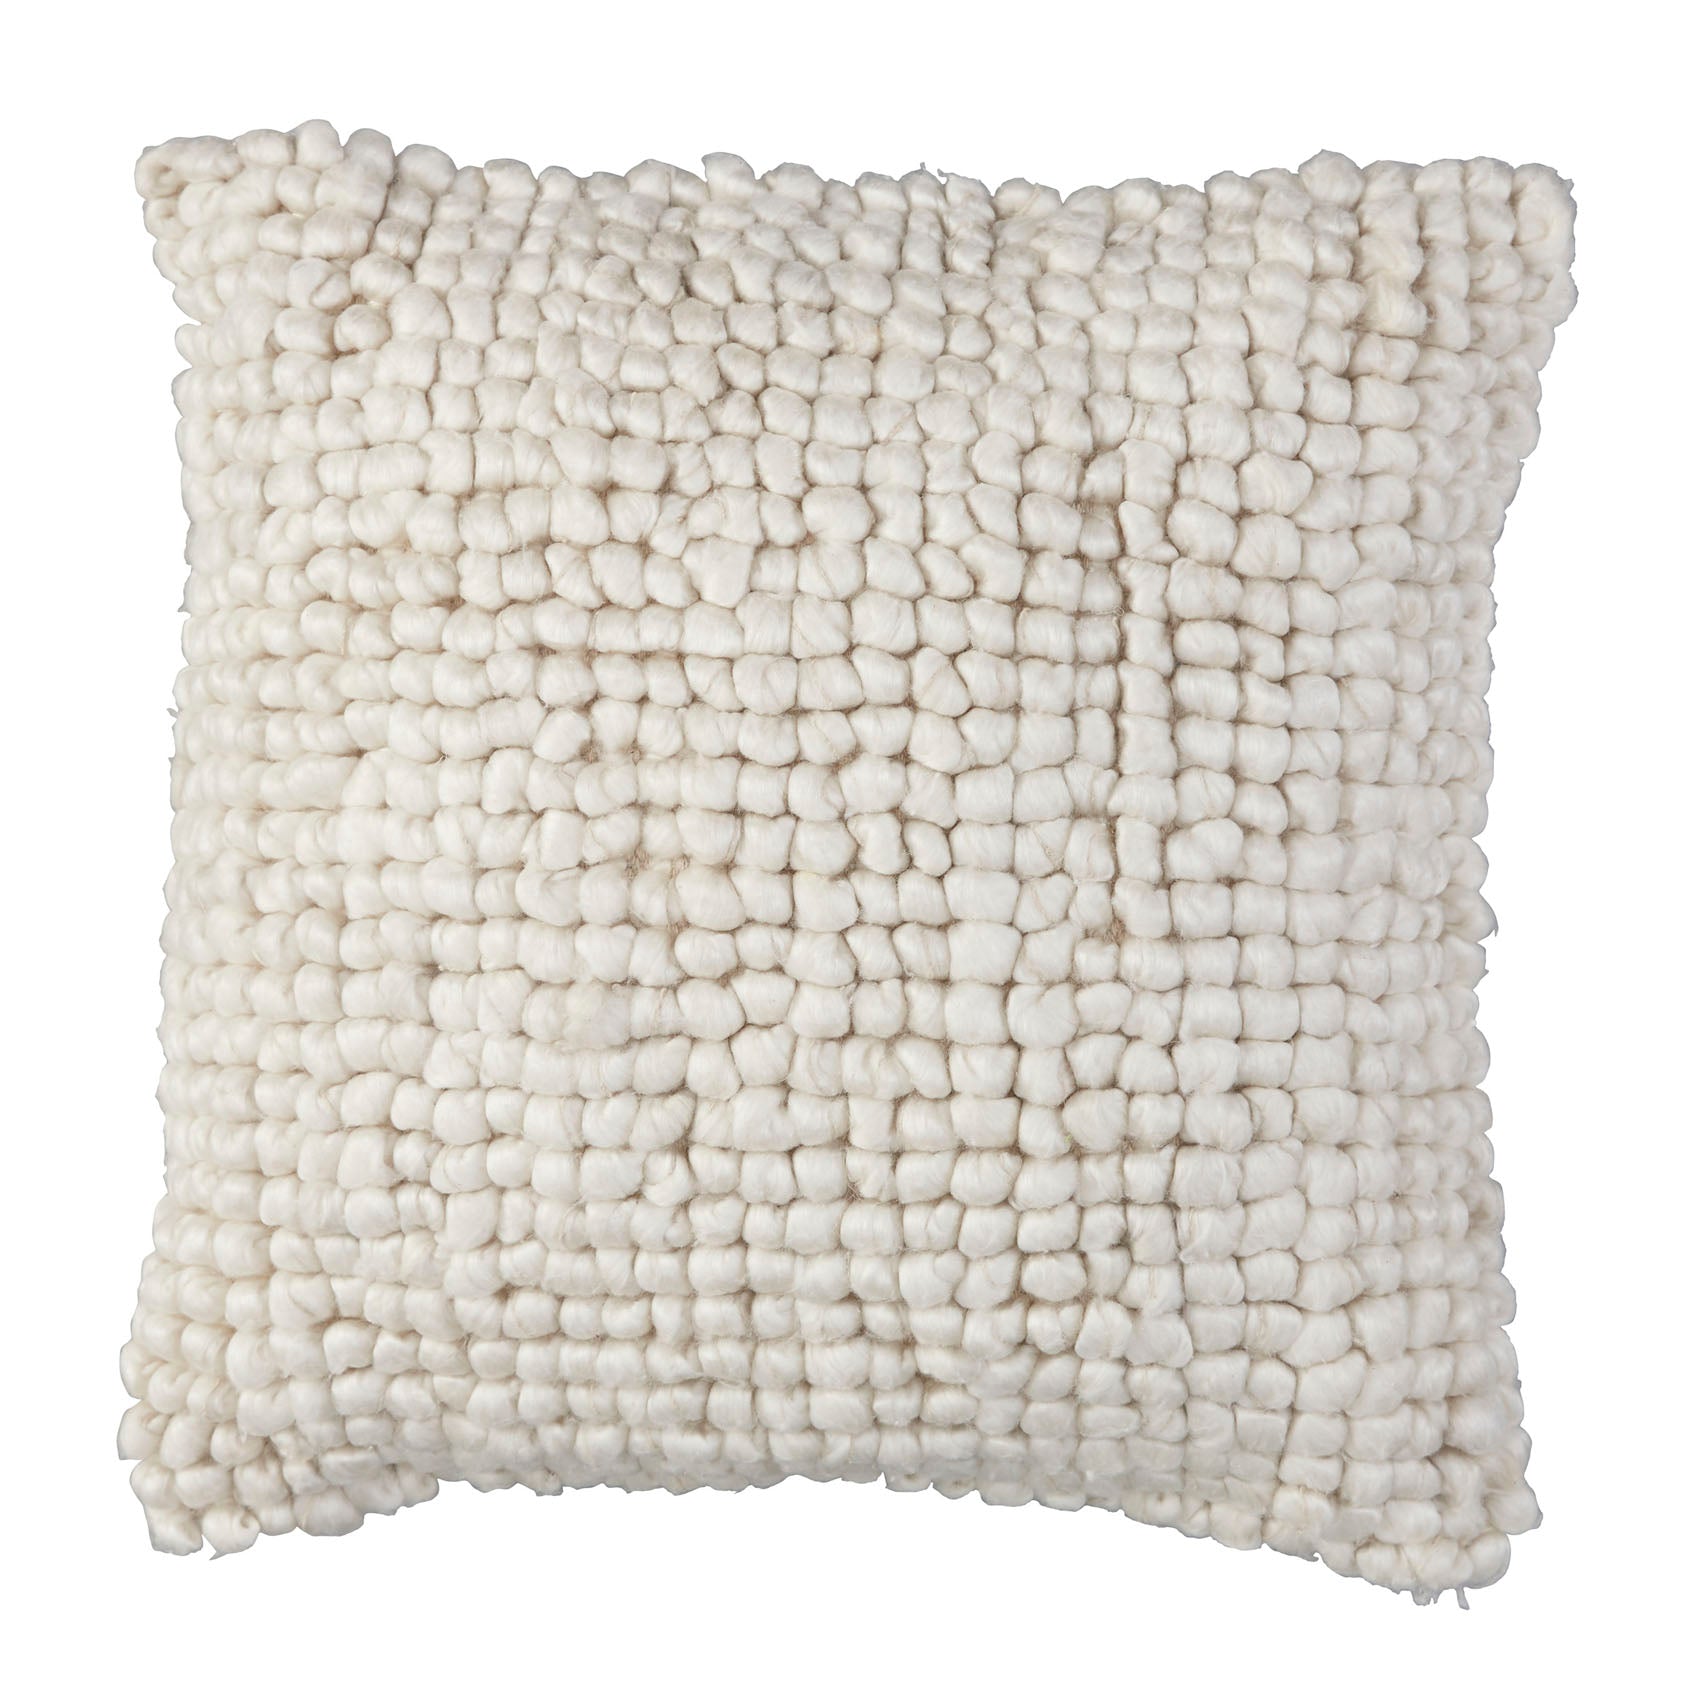 Aavie Accent Pillow (Set of 4) - MJM Furniture